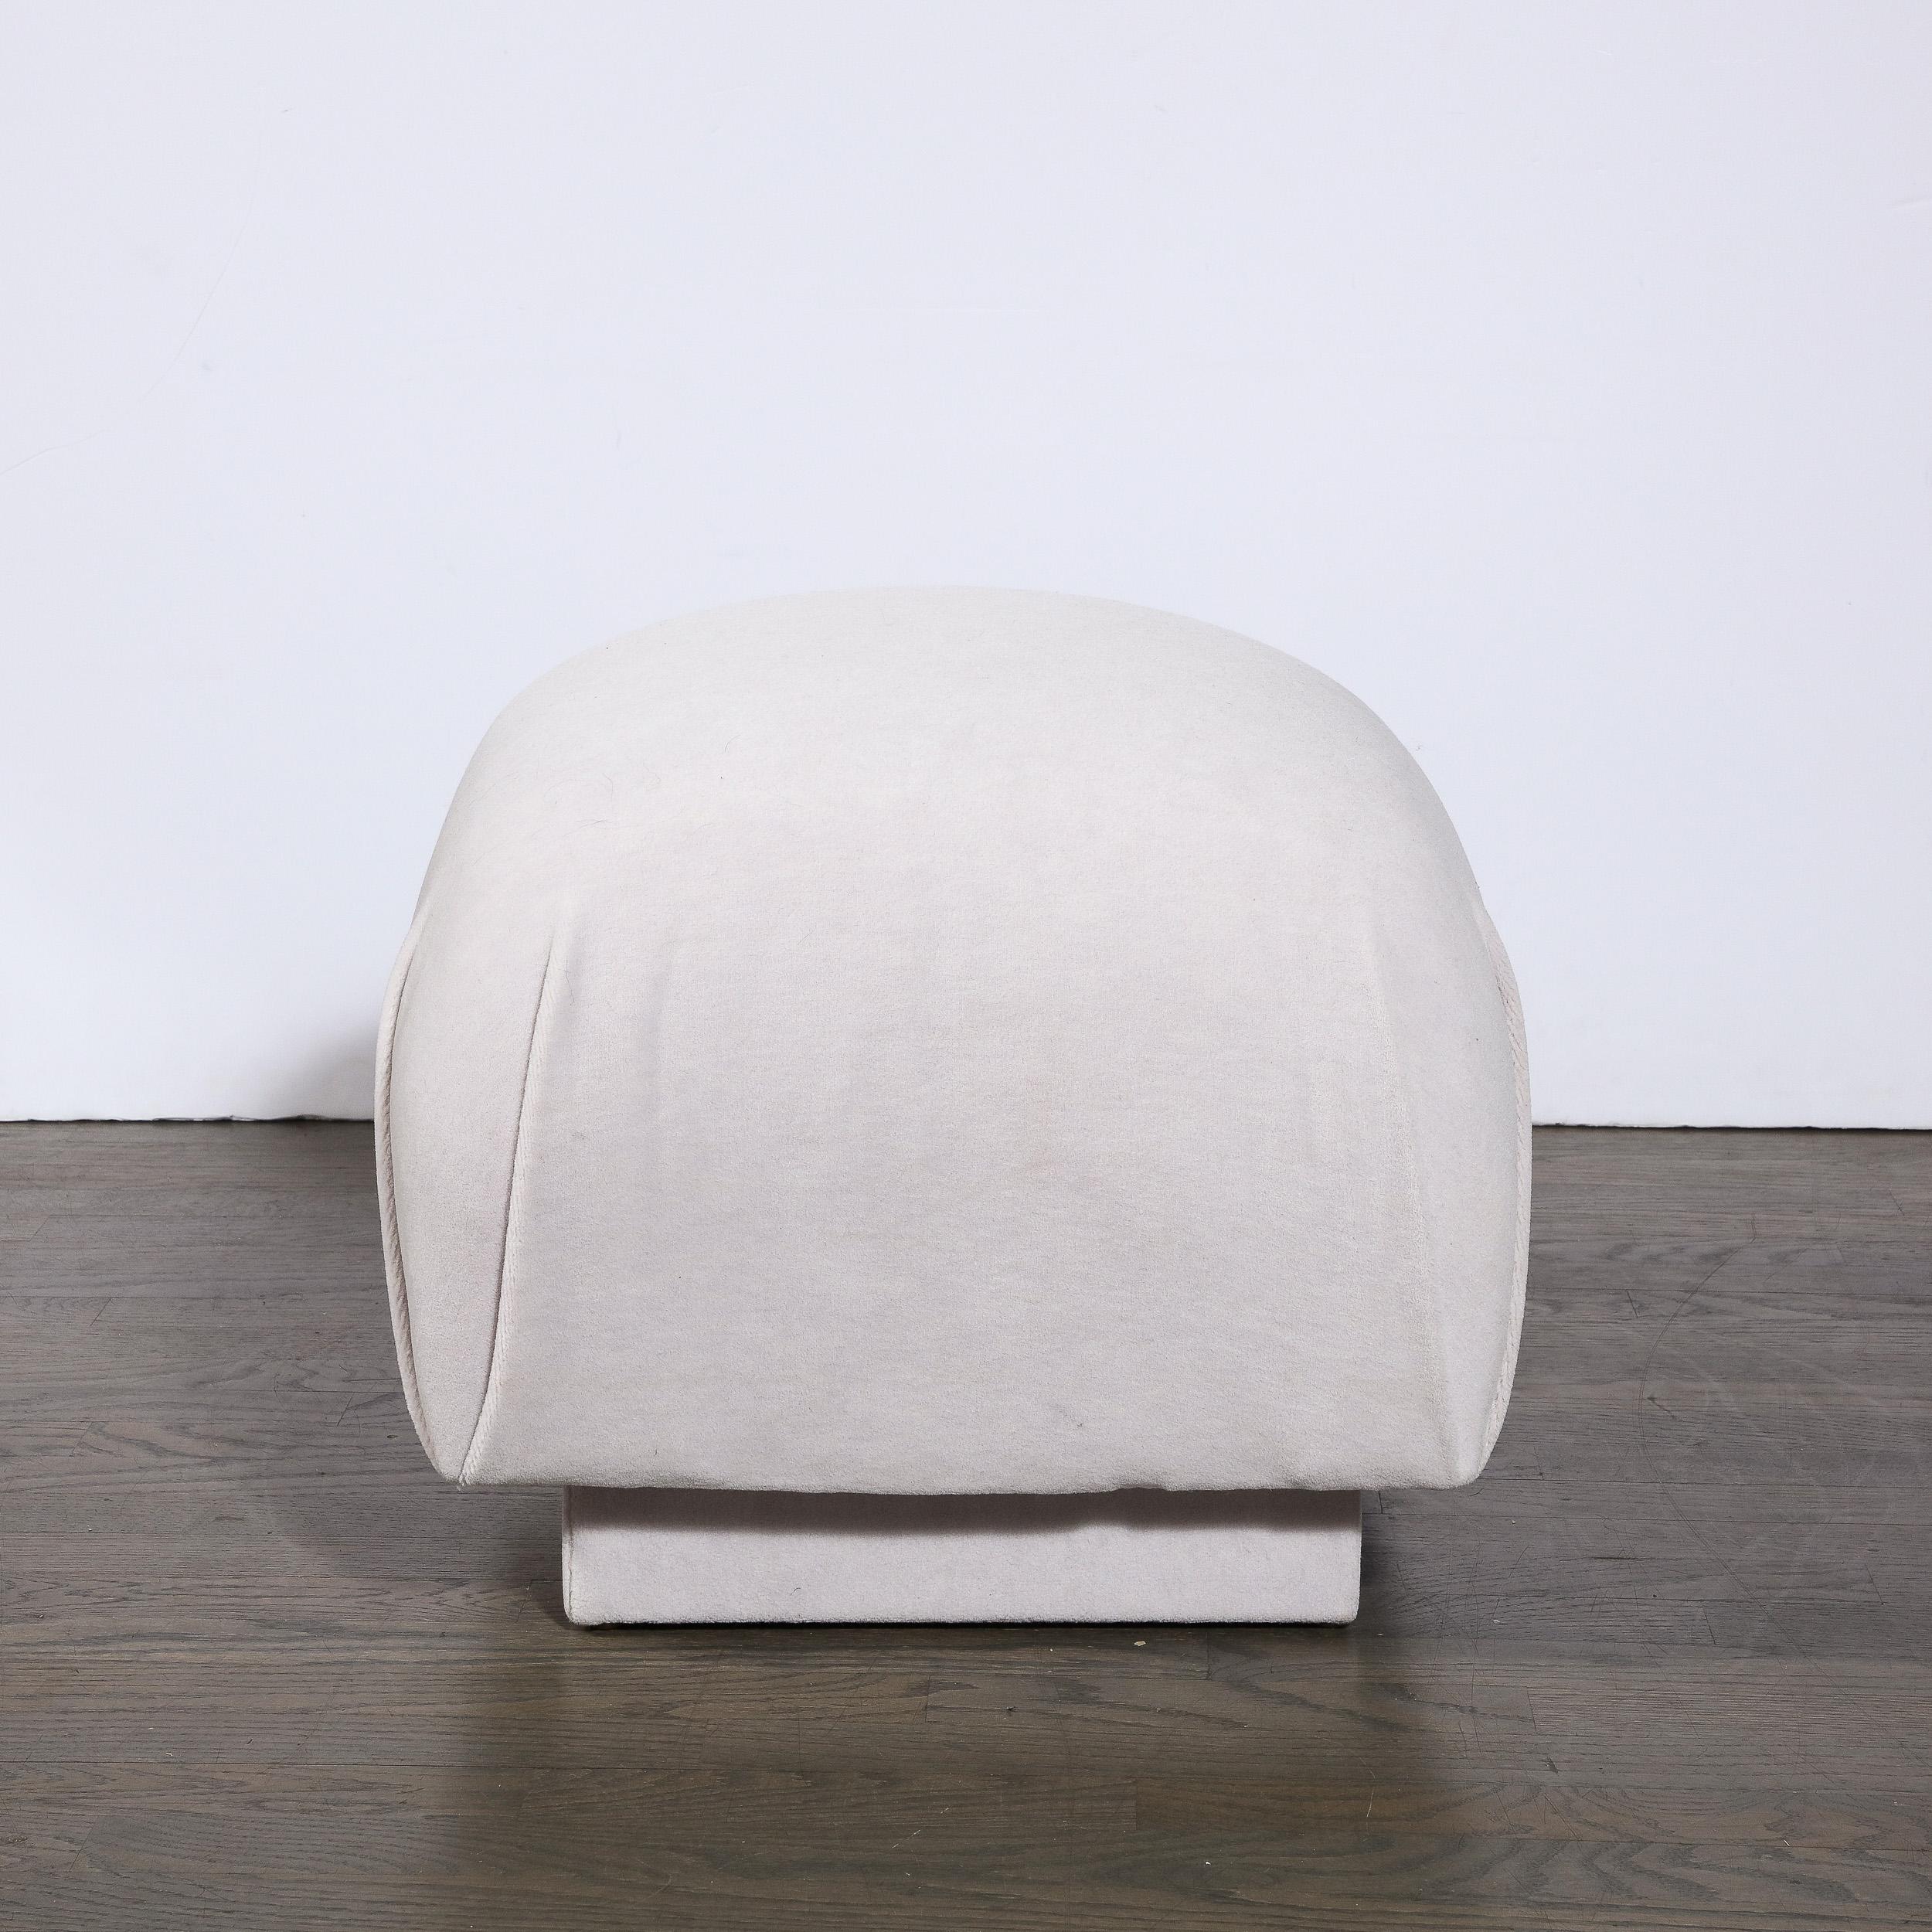 Late 20th Century Mid-Century Modern Ottoman in Powder Grey Mohair by Leon Rosen for Pace For Sale